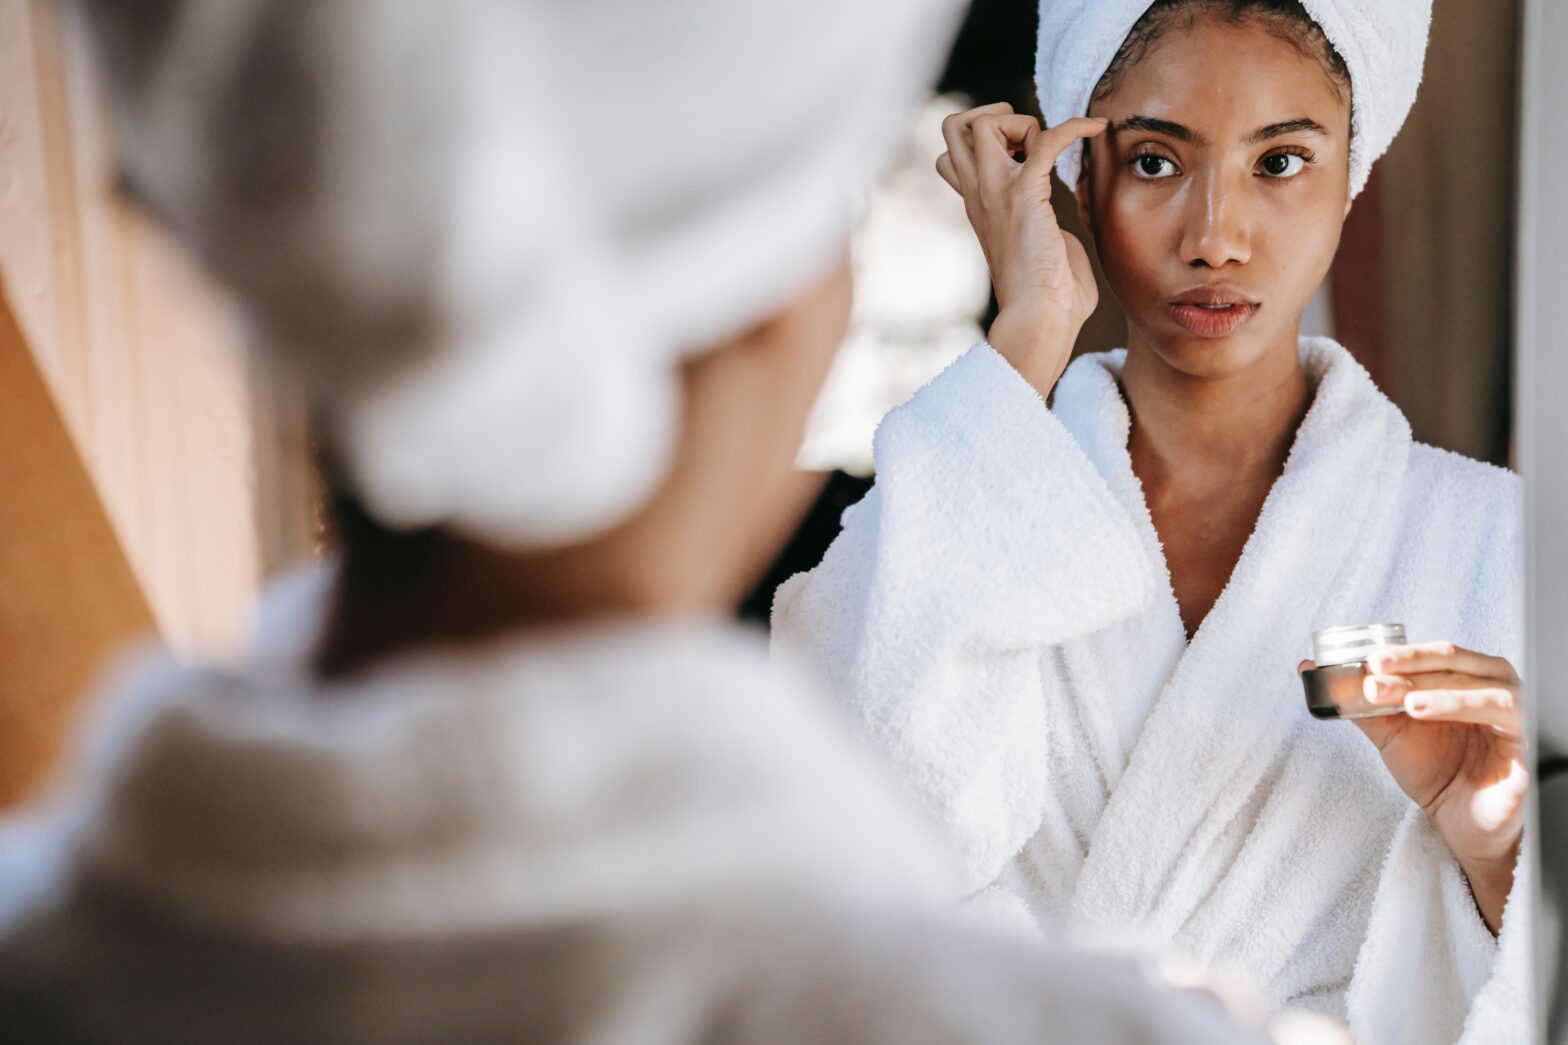 Black woman in robe putting cream on face